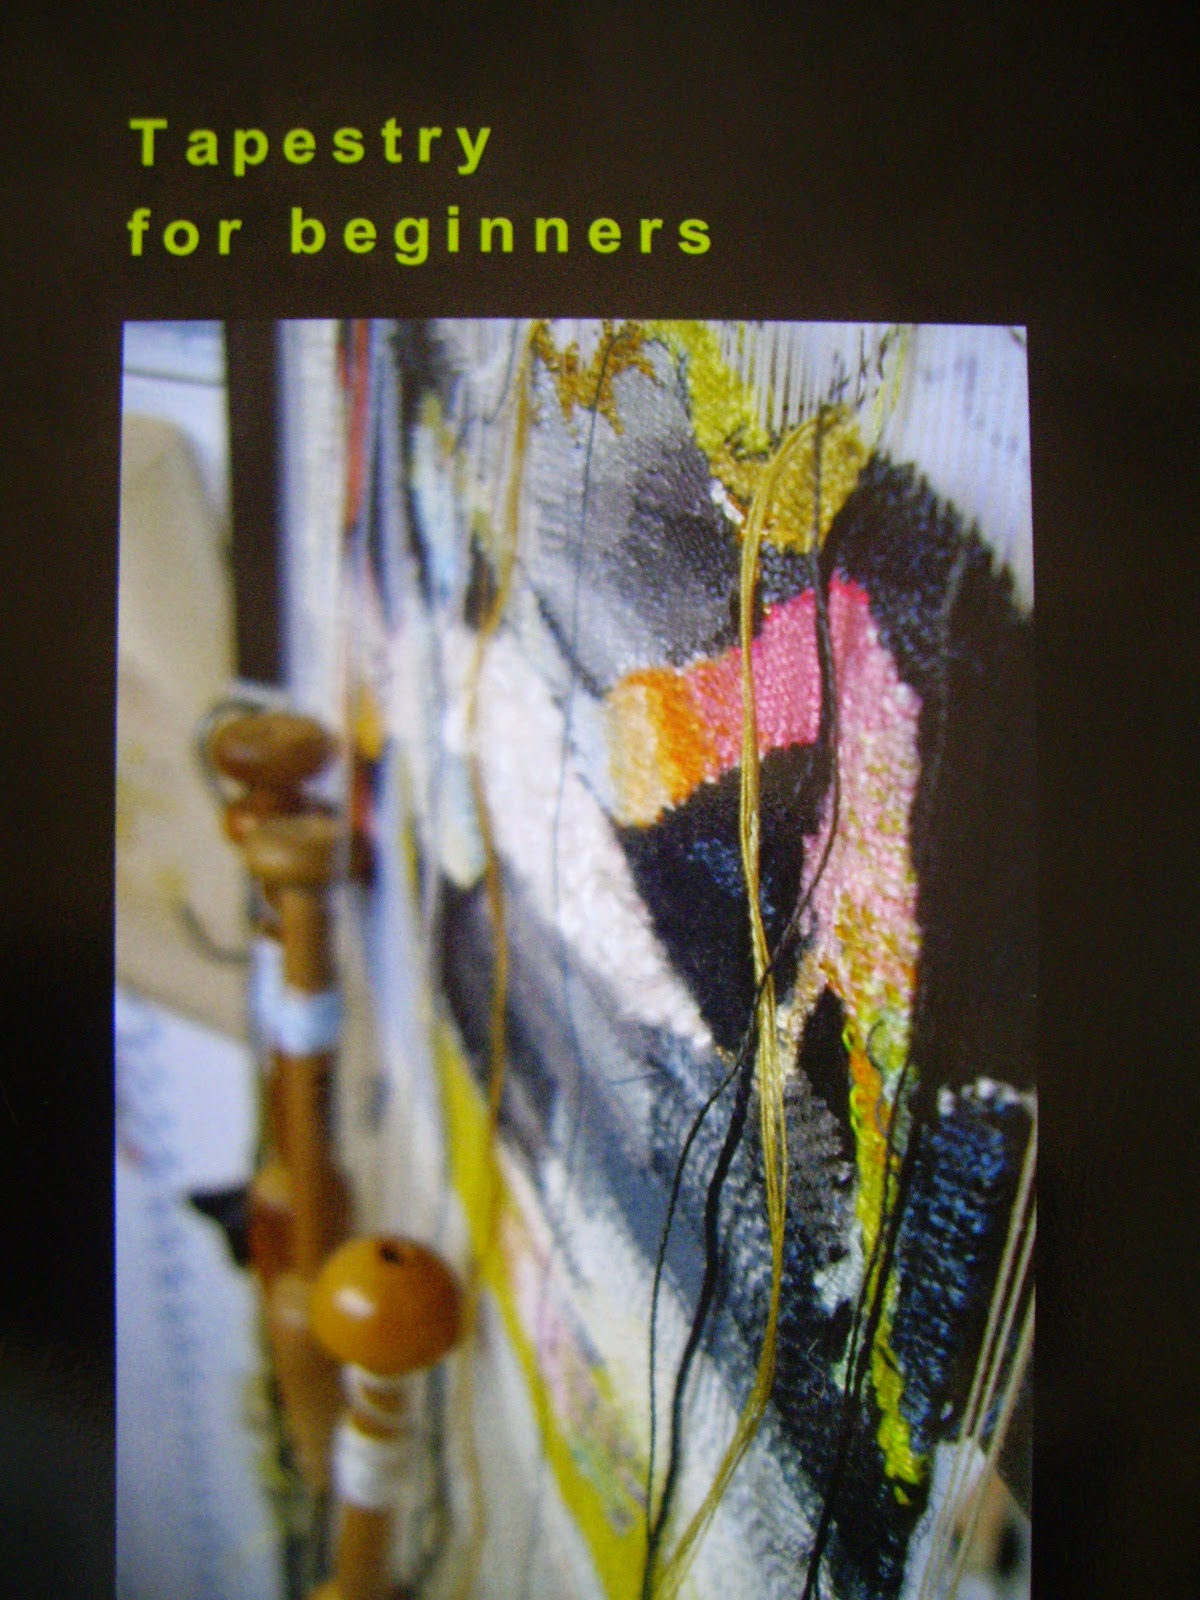 Tapestry for beginners, a tapestry primer